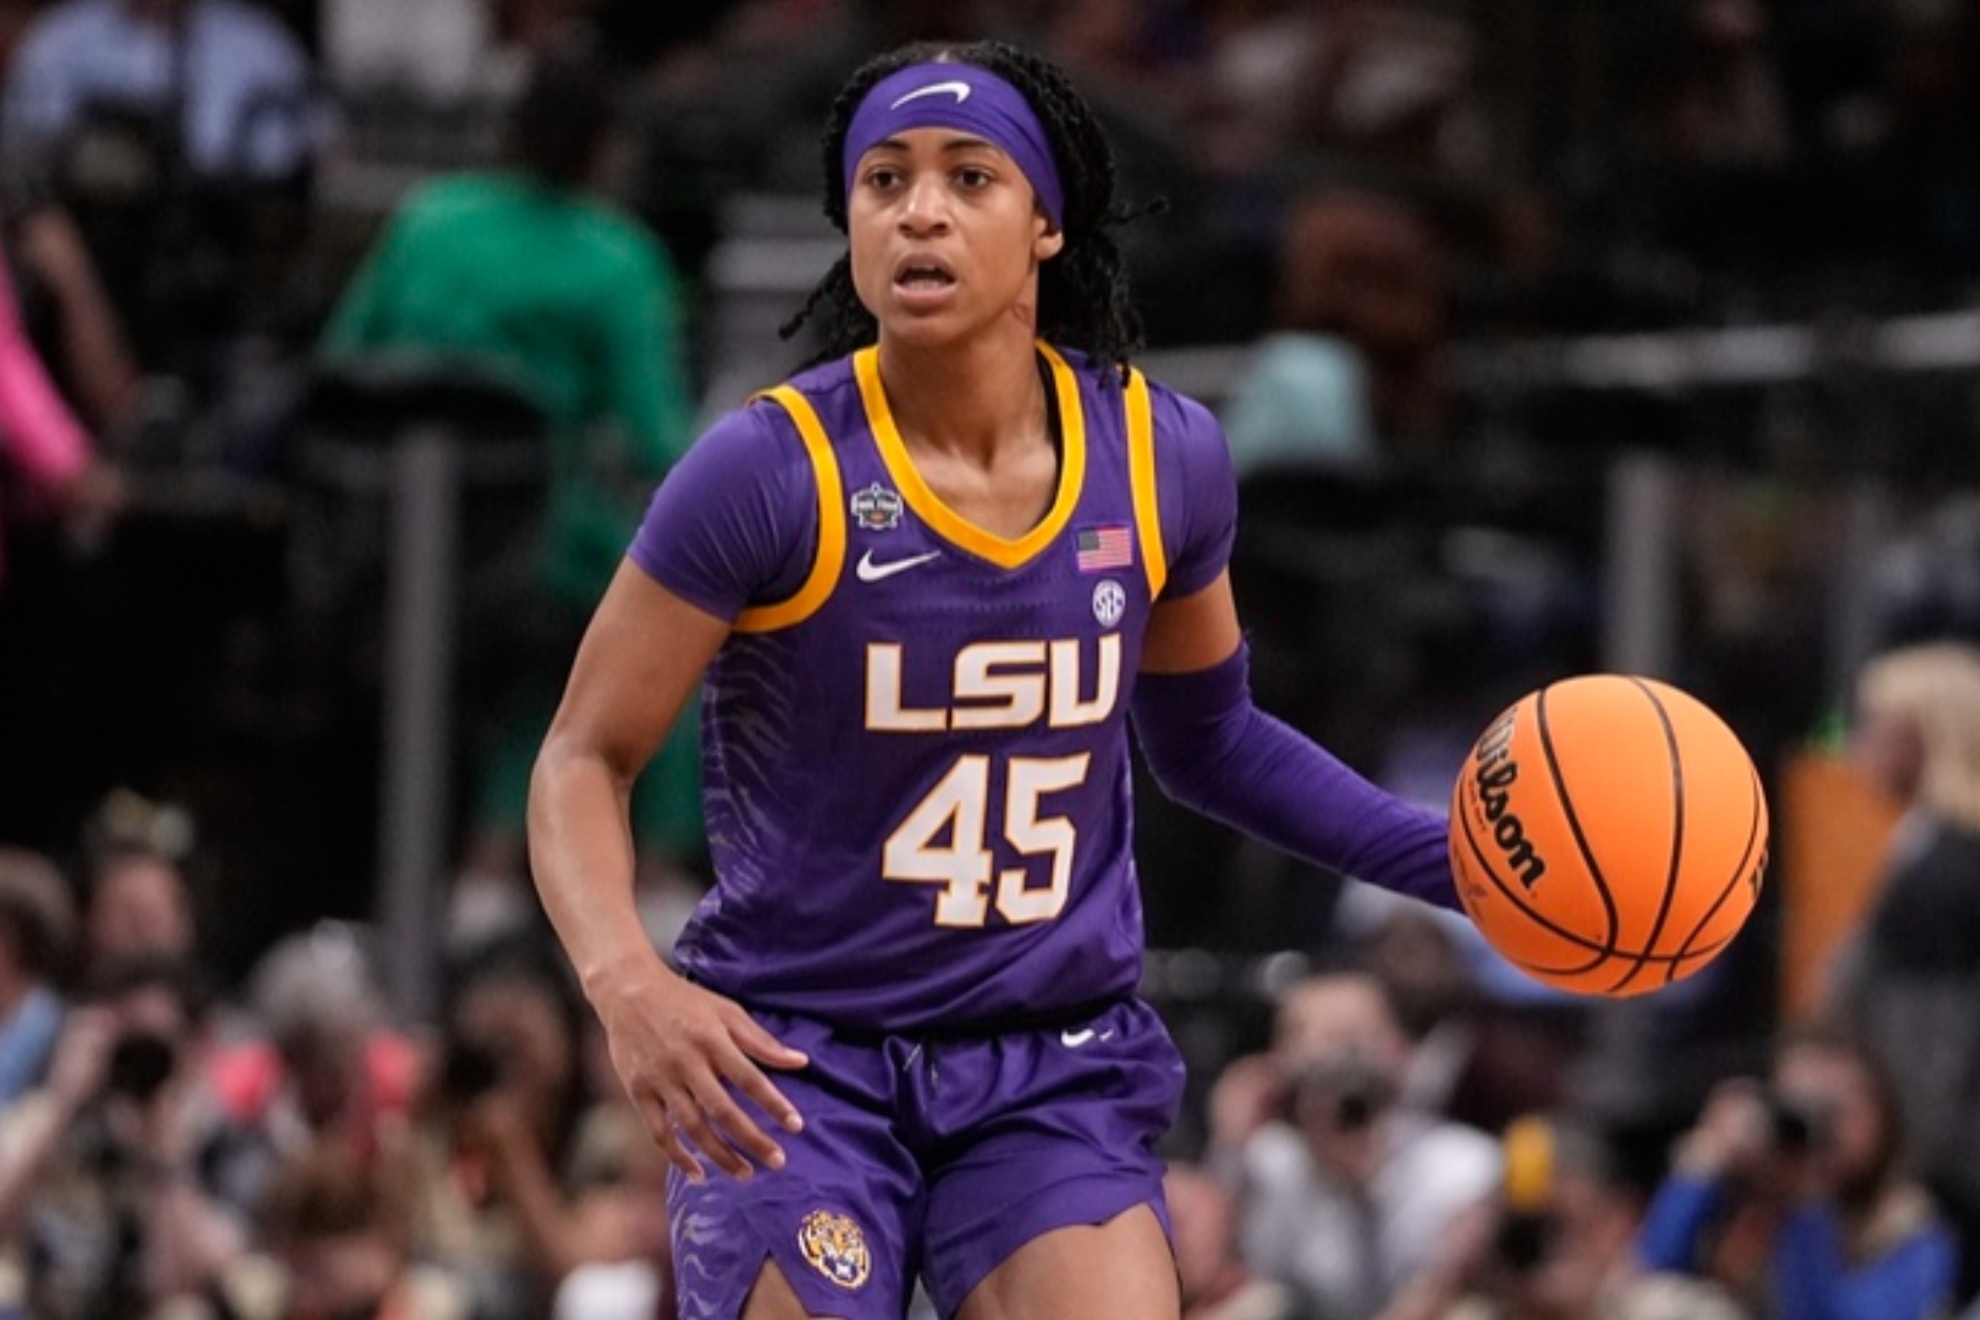 Former LSU player, Alexis Morris, spoke out against coach Kim Mulkey after the Elite 8 elimination